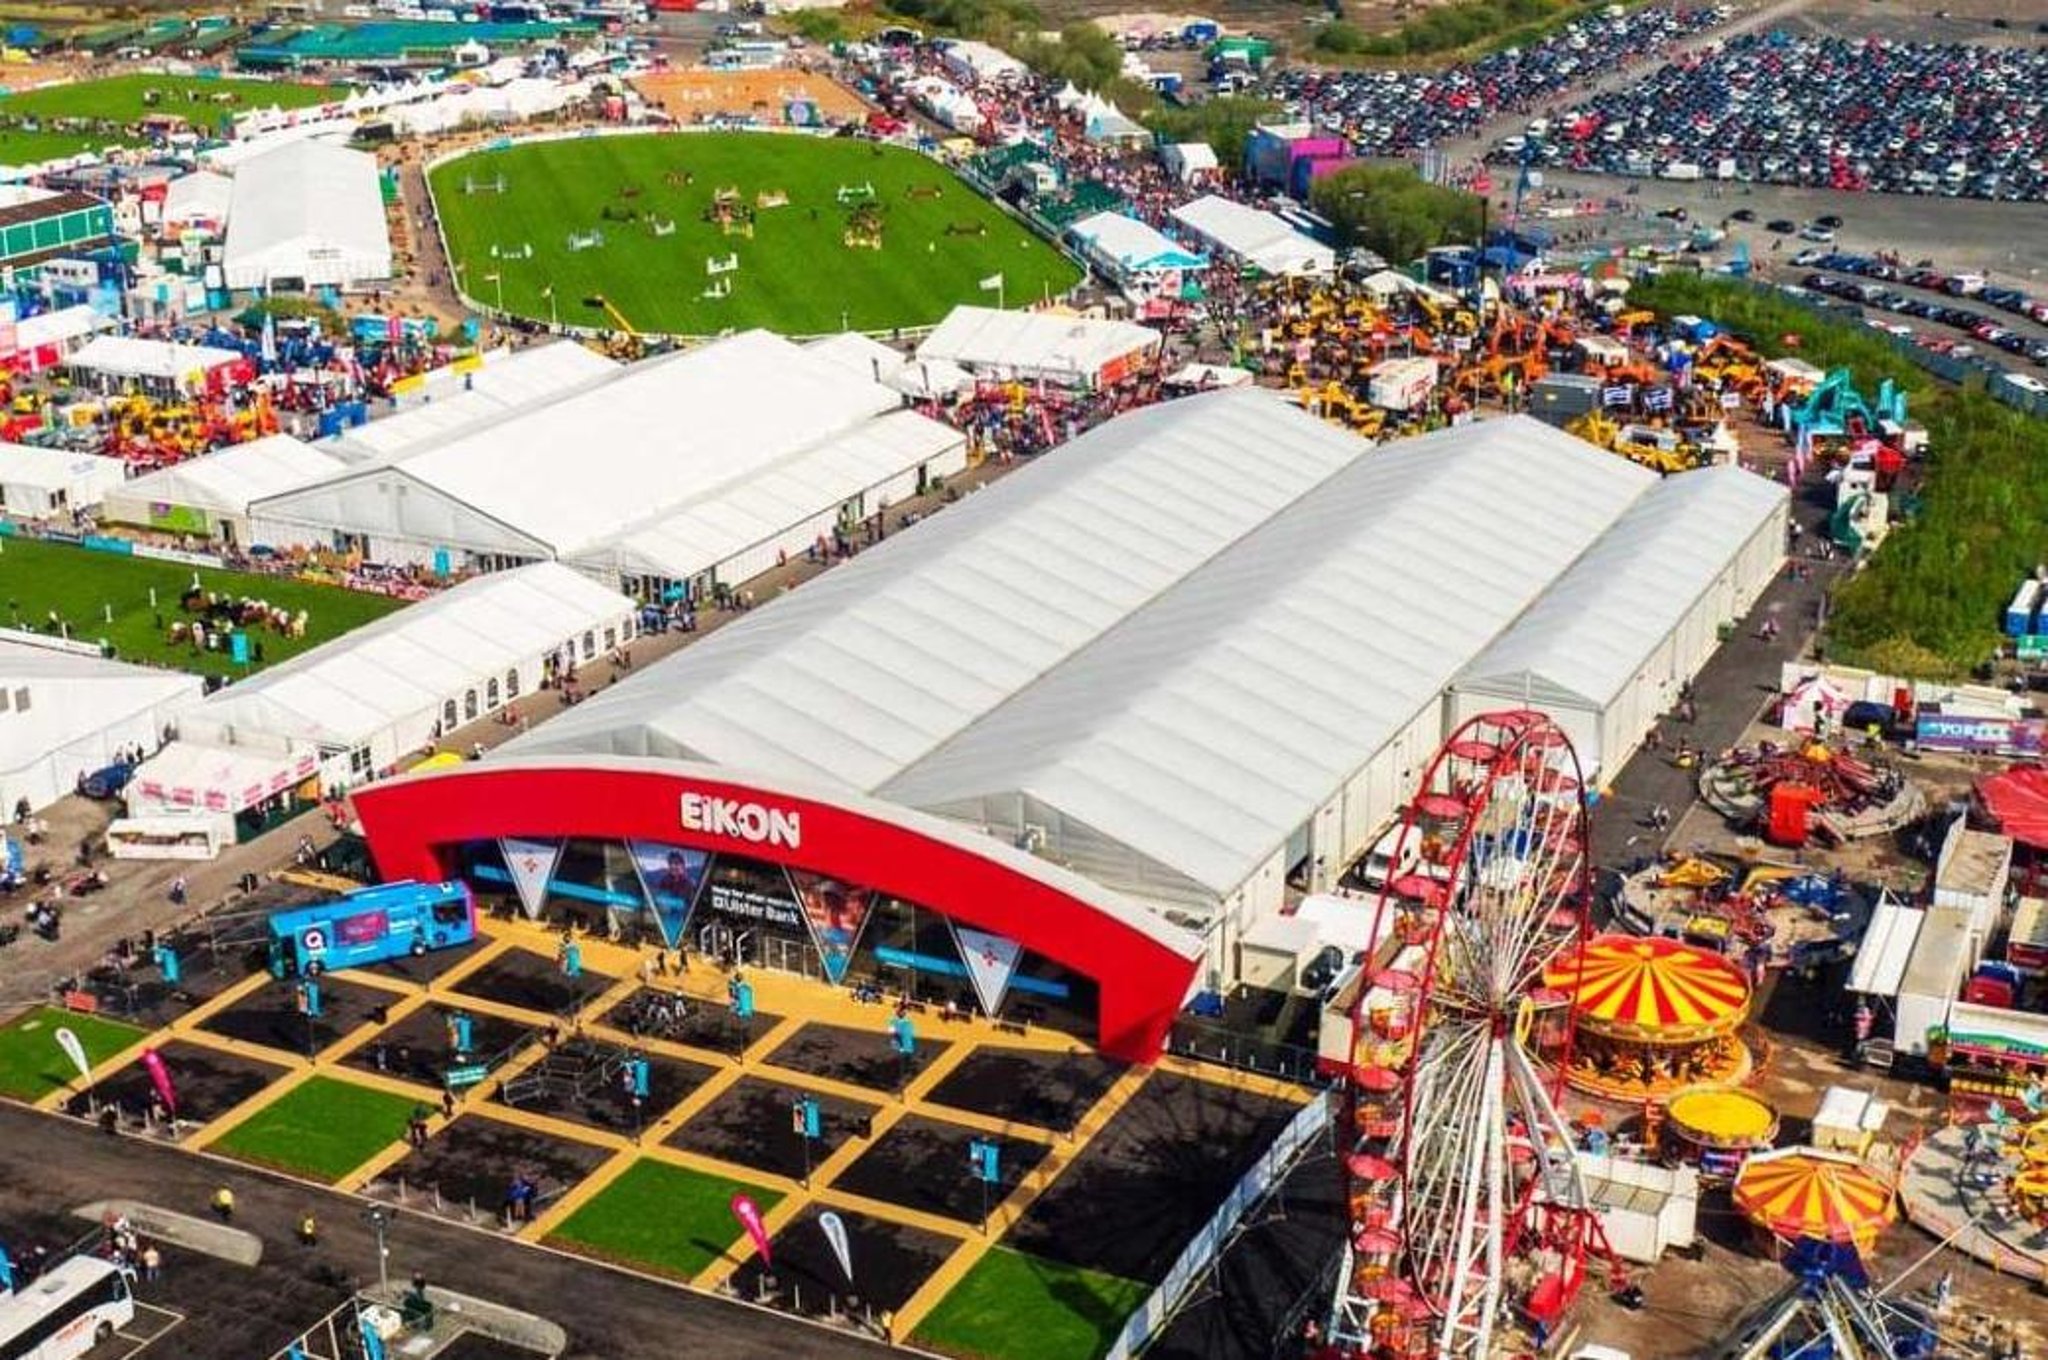 Balmoral Show 2022: When is it, how do I get tickets and how do I get there?